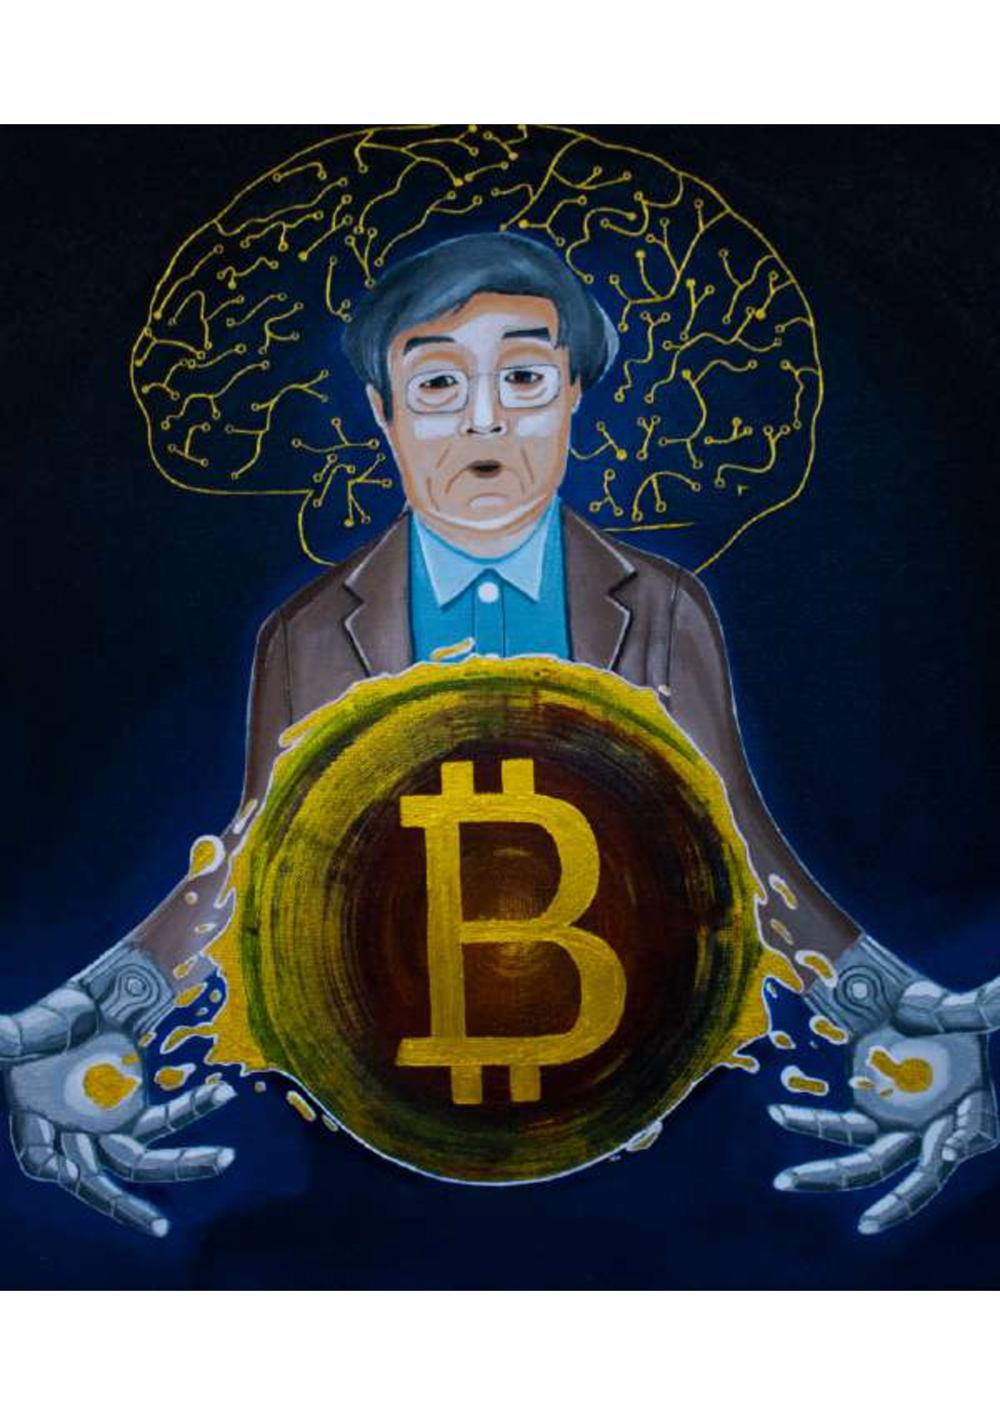 Certificate of Authenticity and Consignment-The Bitcoin Theory